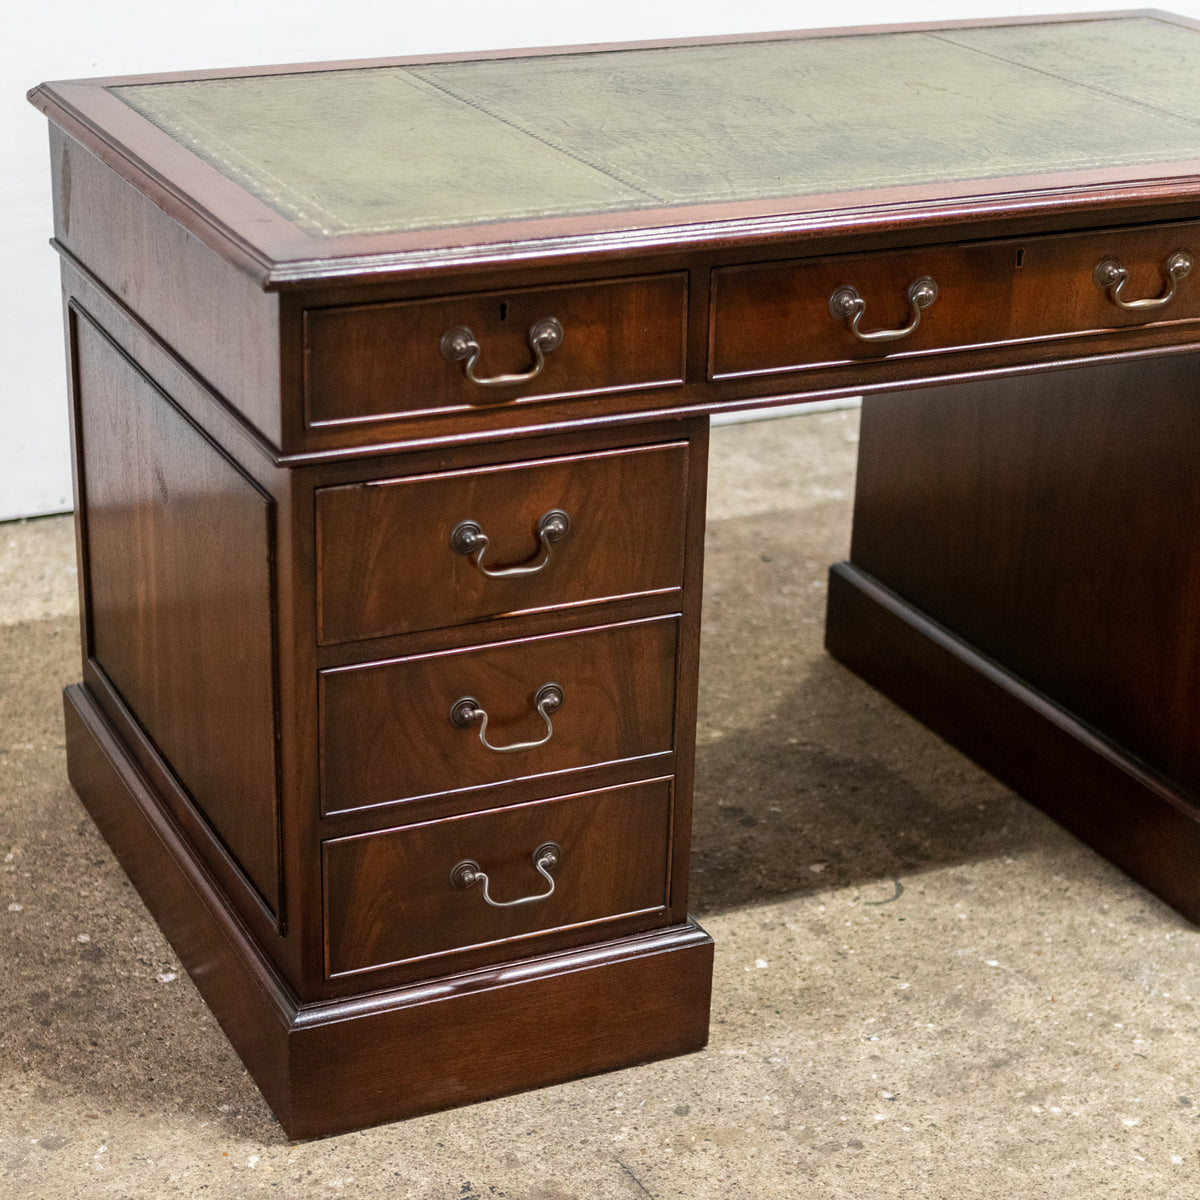 Reclaimed Flame Mahogany Pedestal Desk | Charles Barr | The Architectural Forum